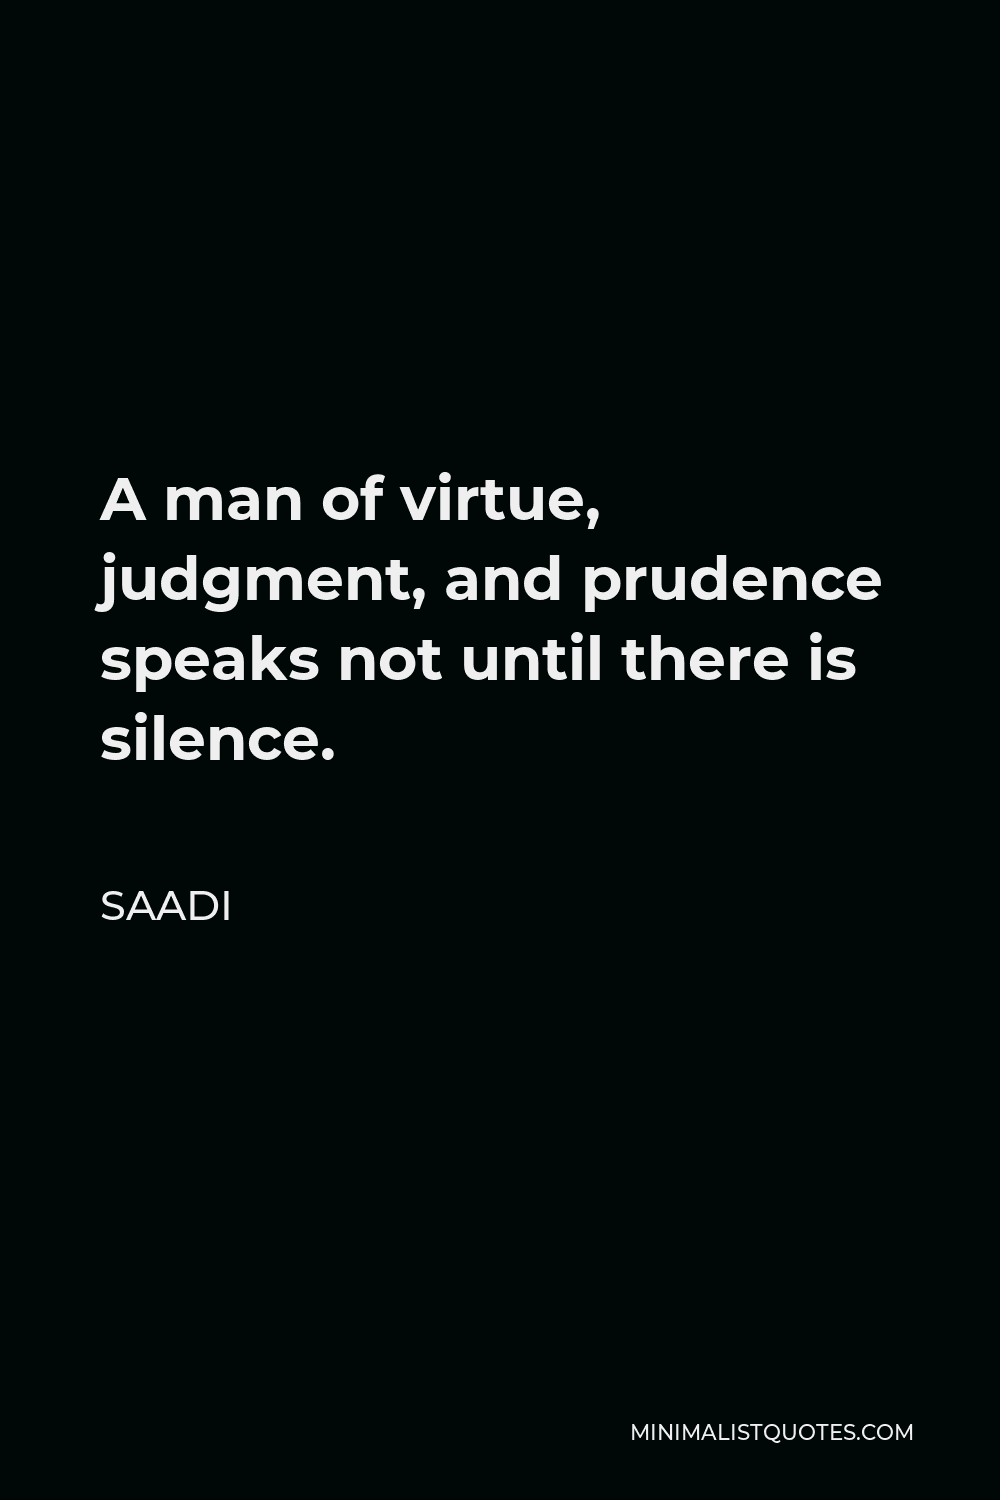 Saadi Quote - A man of virtue, judgment, and prudence speaks not until there is silence.